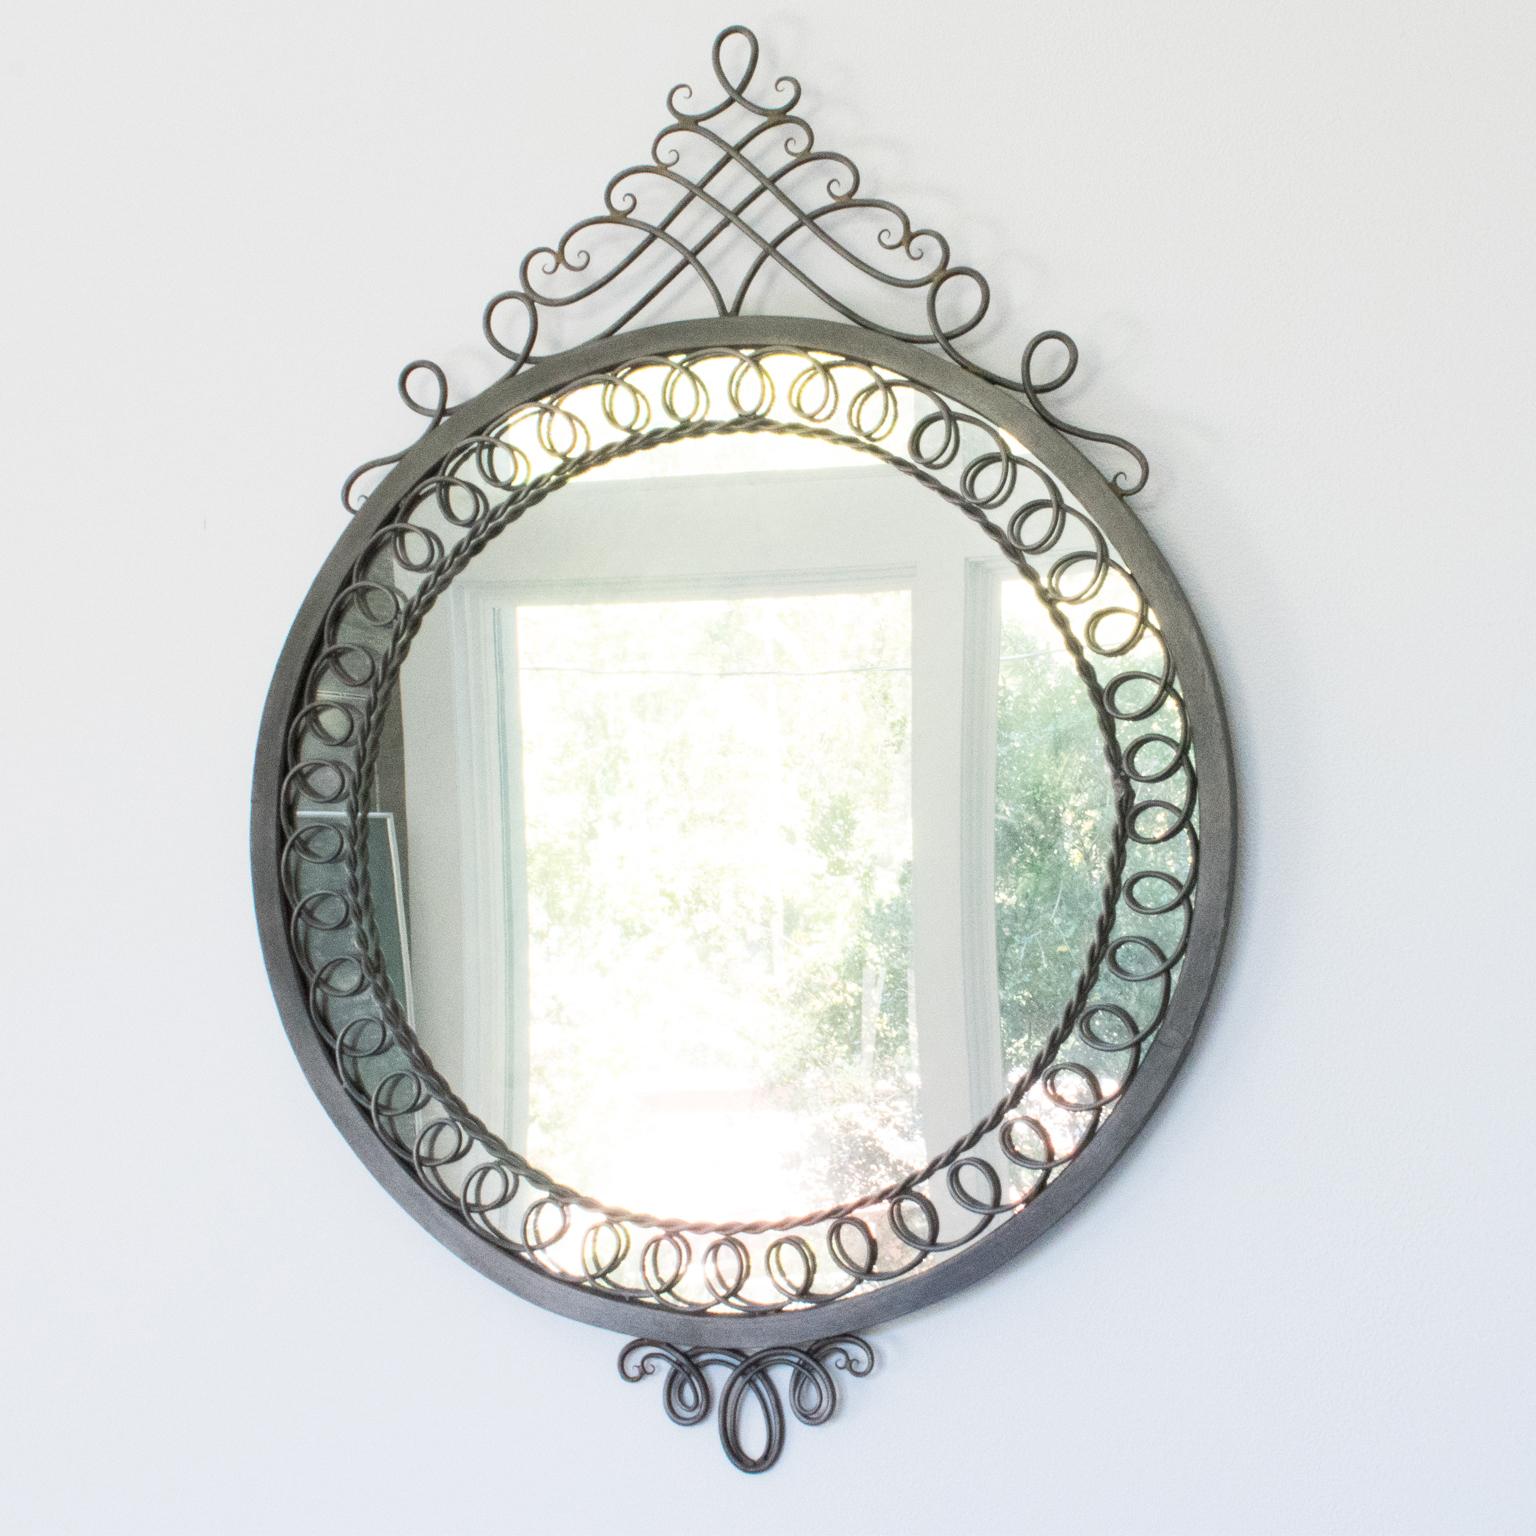 Modern Mid-Century Cast Iron Ornate Wall-Mounted Mirror, France 1950s